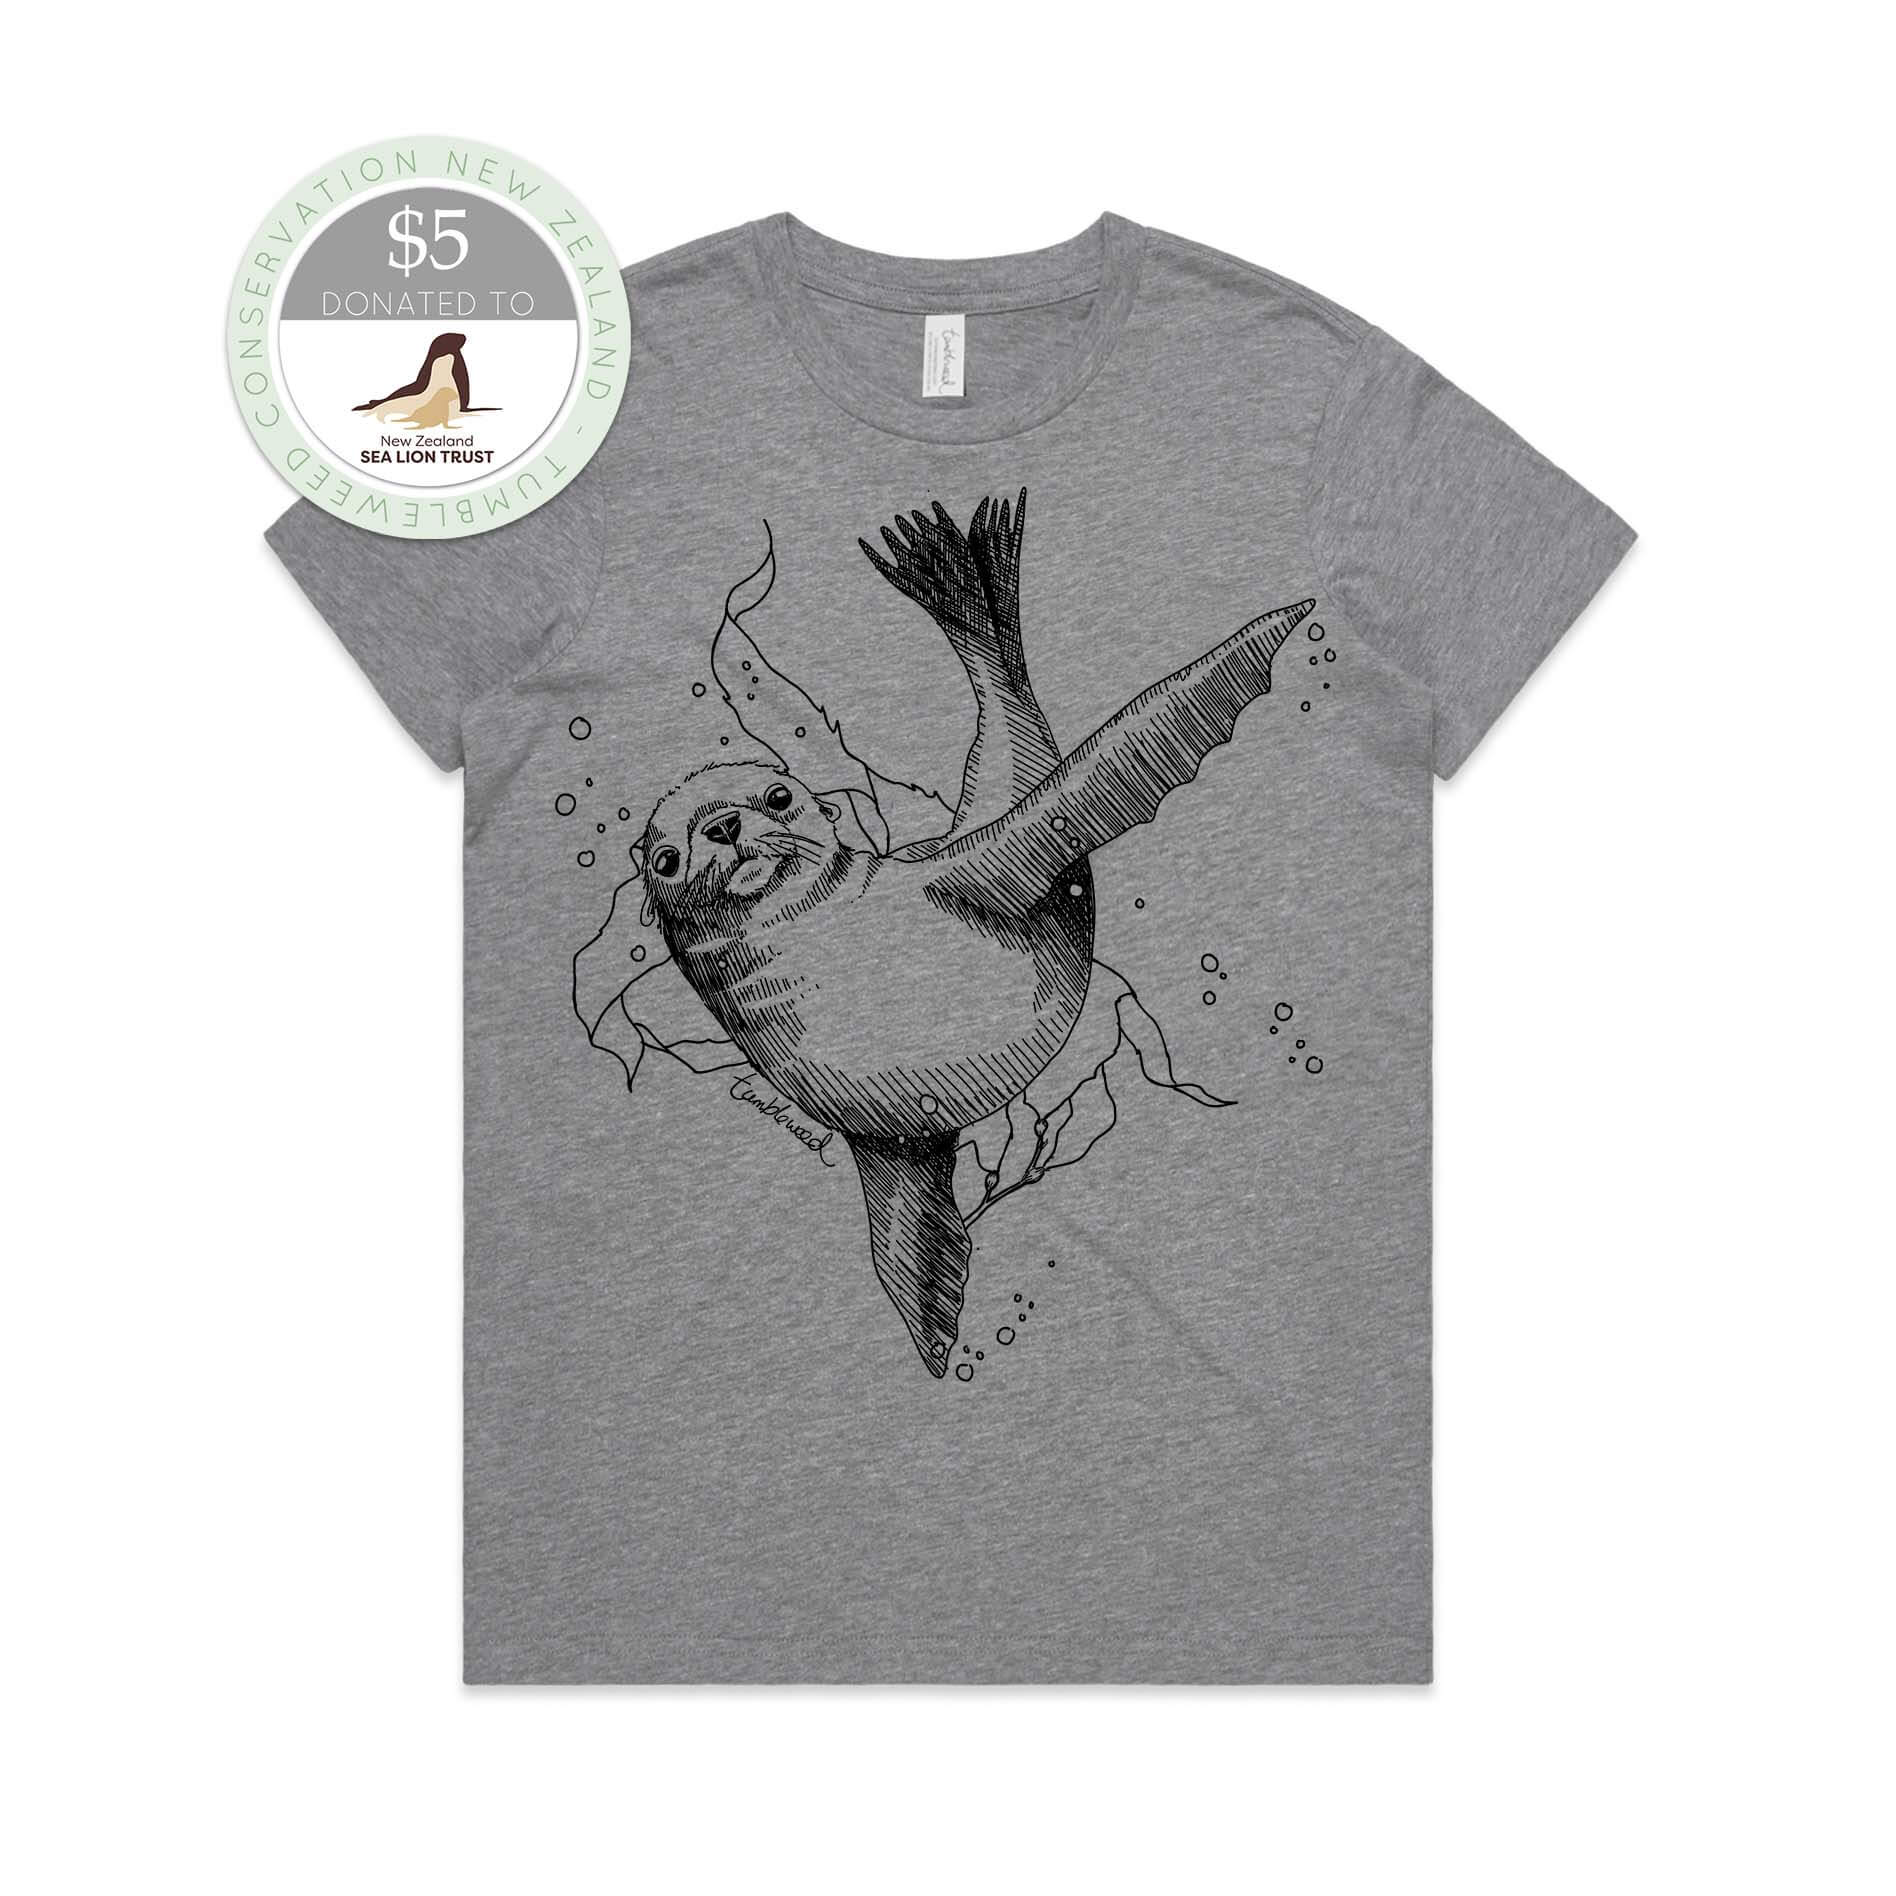 White, female t-shirt featuring a screen printed New Zealand sea lion design.